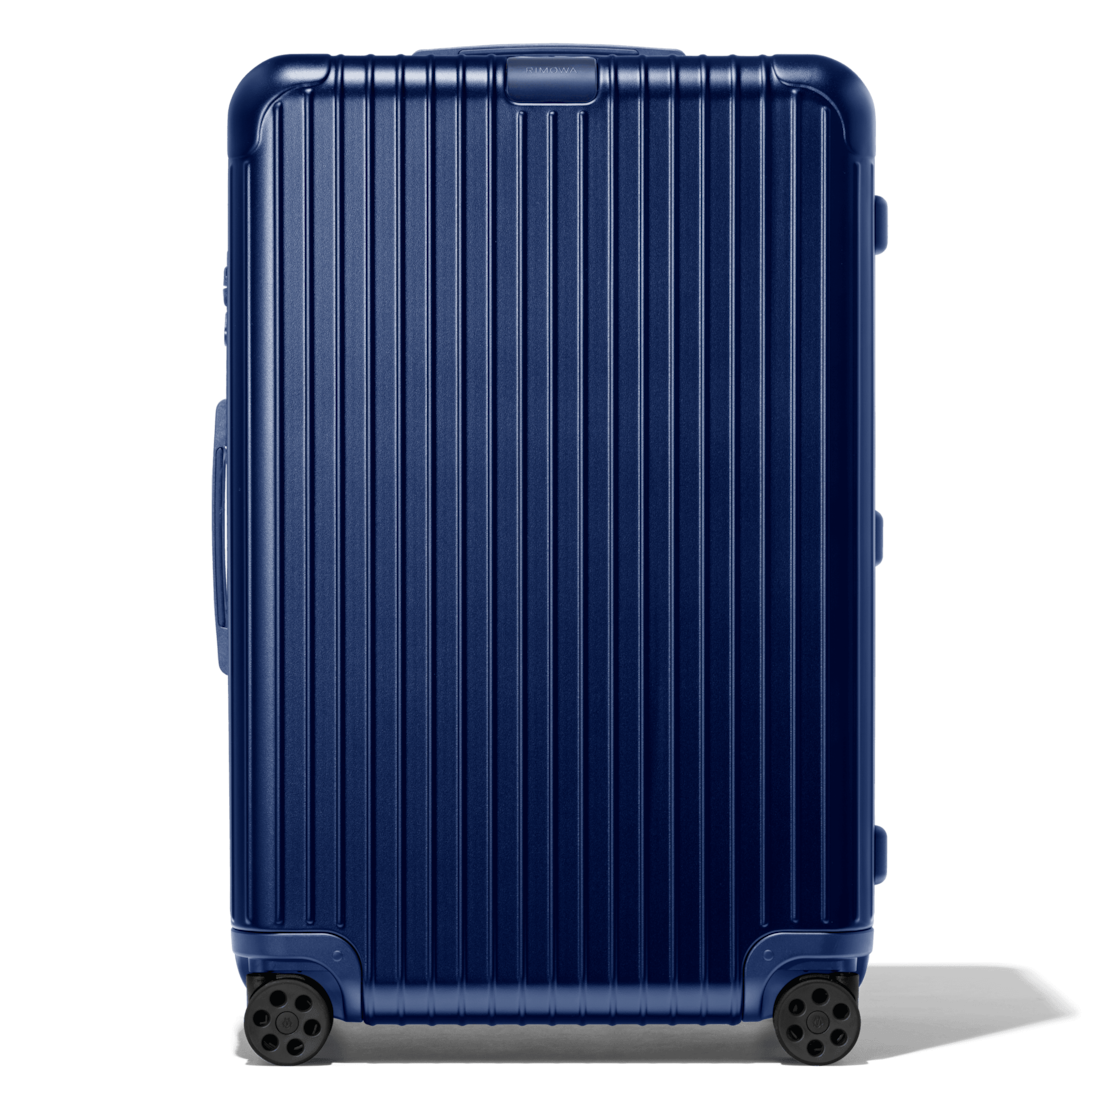 Rimowa Suitcases in various colors & sizes from 400 - 500Y : r/1688Reps